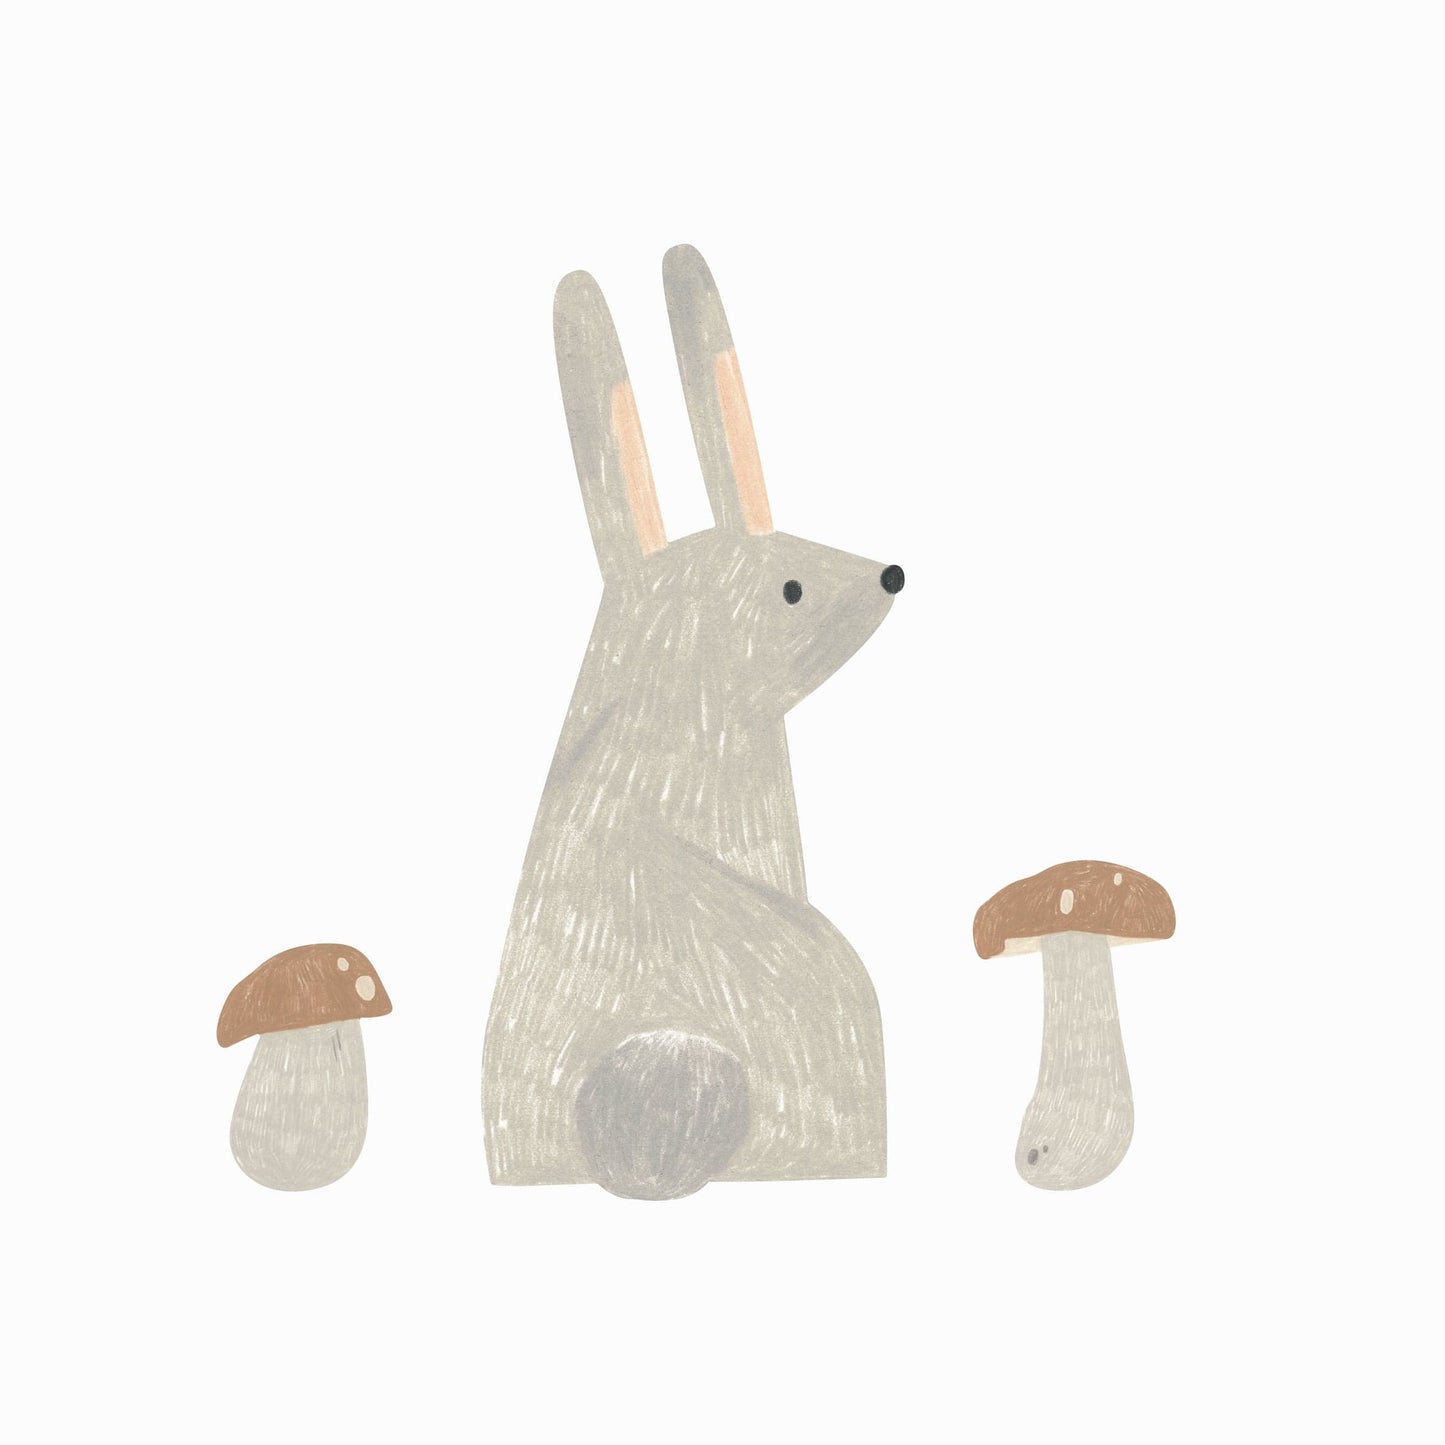 Showing the hand-drawn rabbit and 2 toadstool sticker sheet. Rabbit is a brown/grey colour and is facing away so we can see it's tail and is looking over it's shoulder.